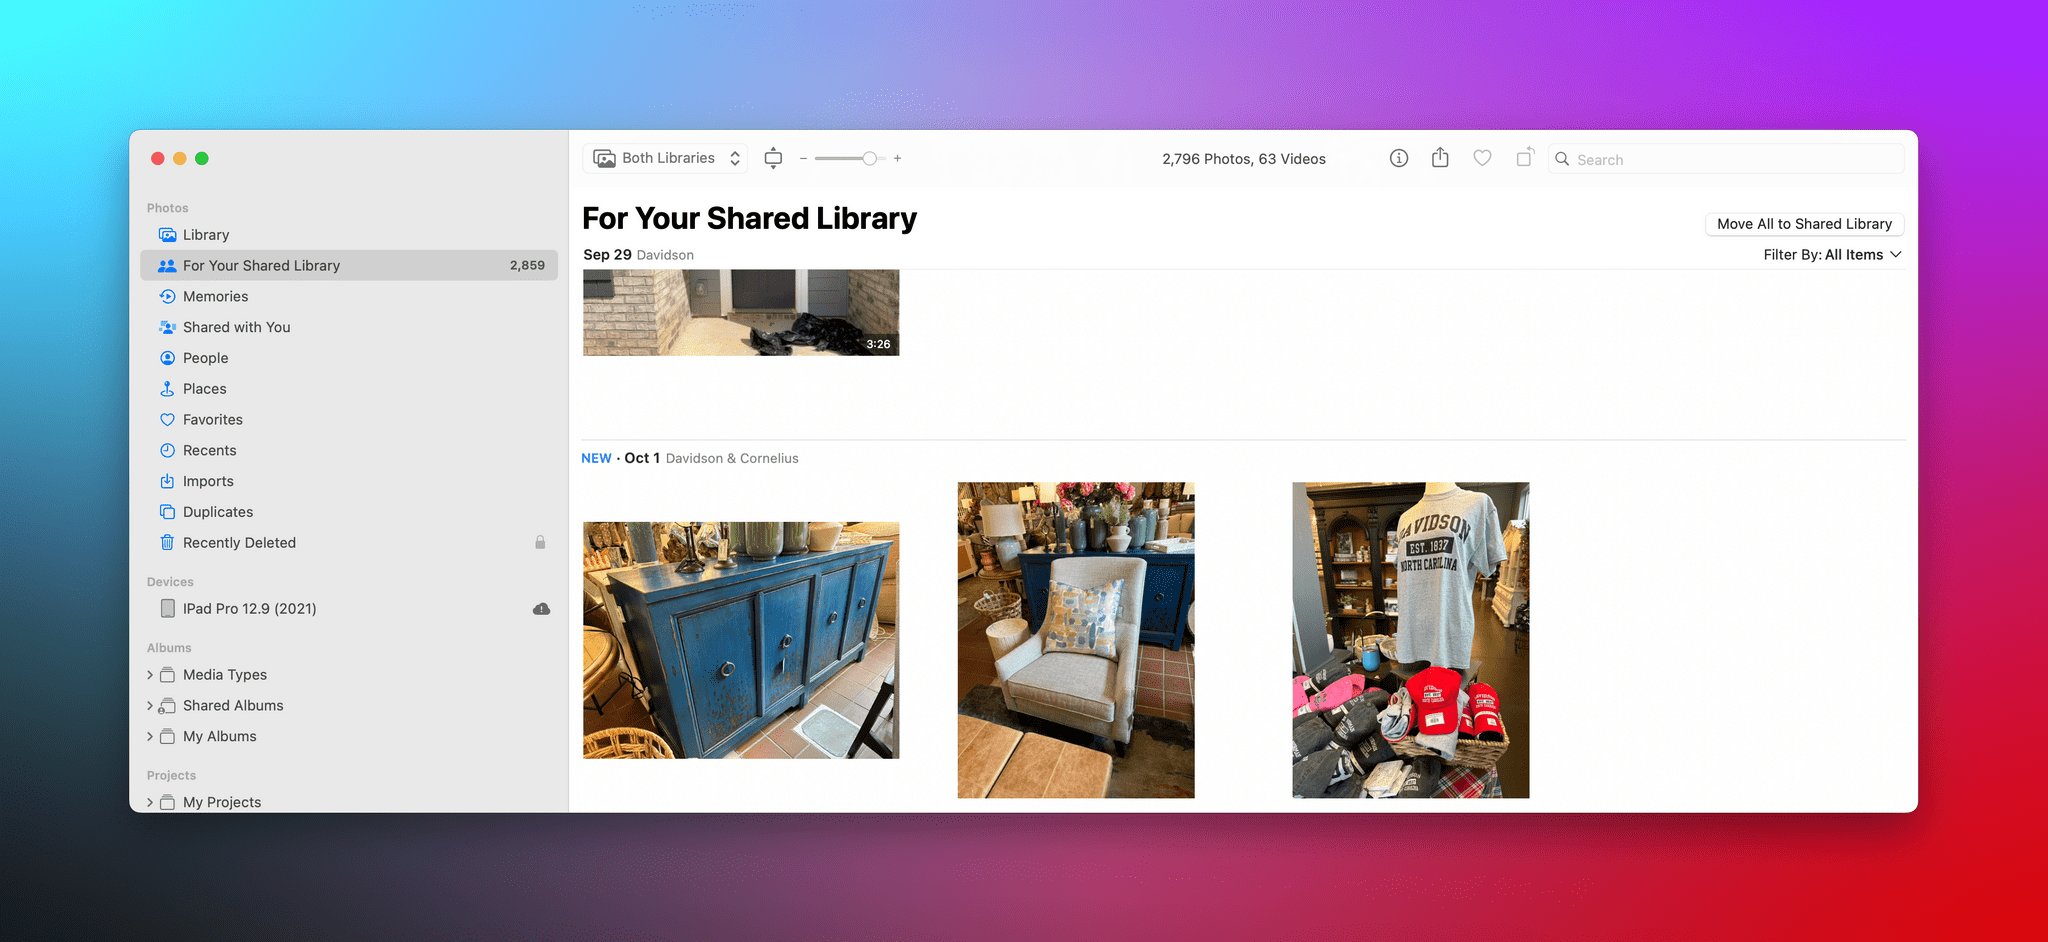 Suggested photos that I took when Jennifer and I were out shopping for furniture.